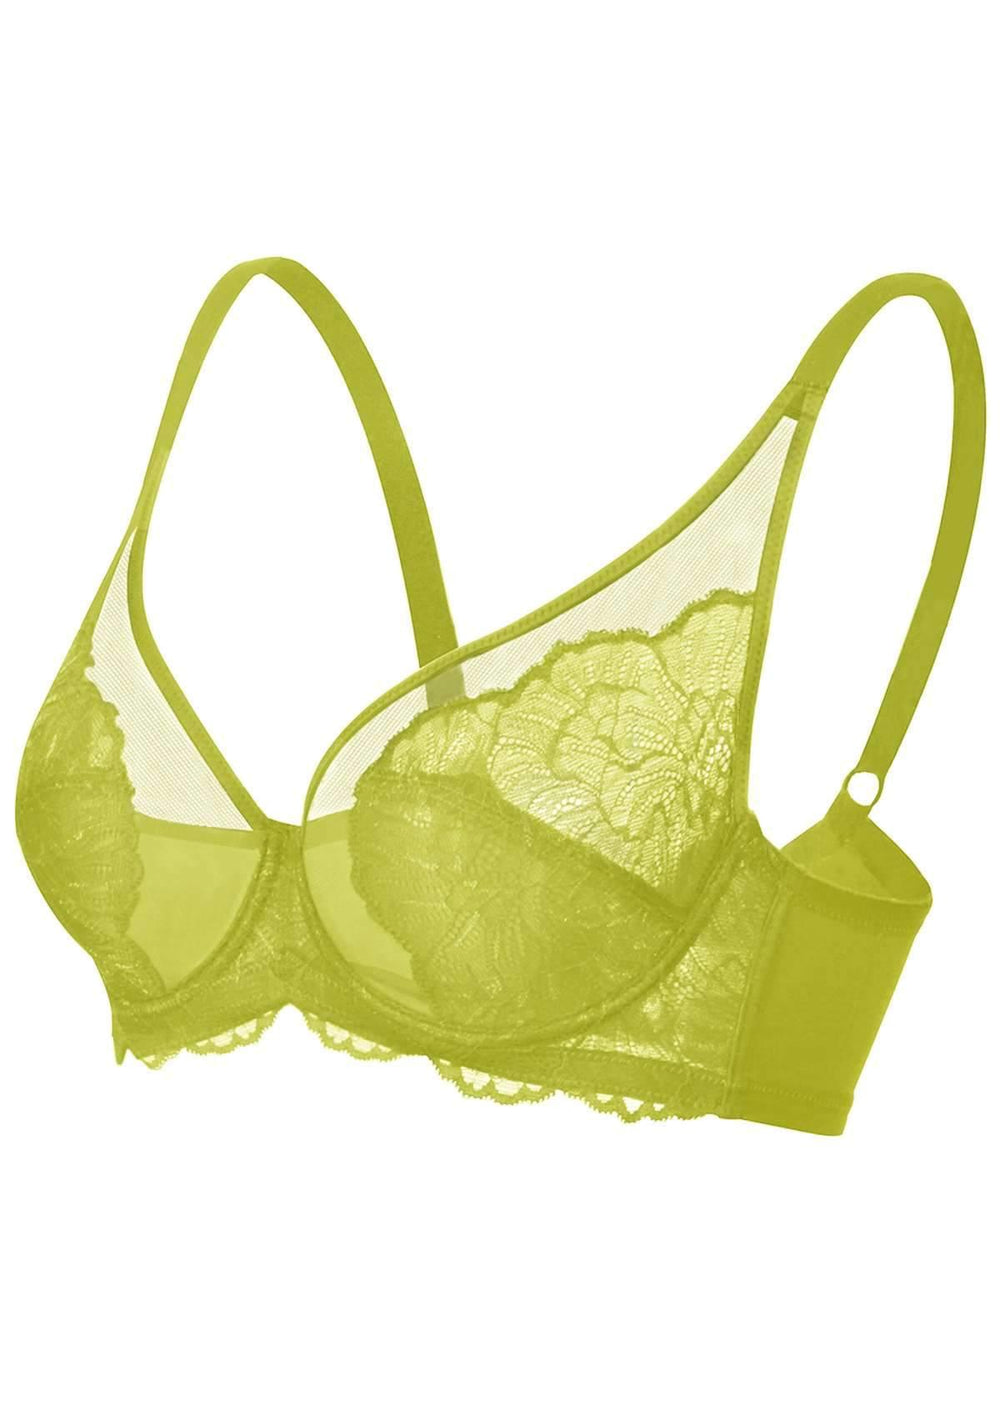 HSIA Blossom Plus Size Lace Bra - Wired, Unpadded, See-Through